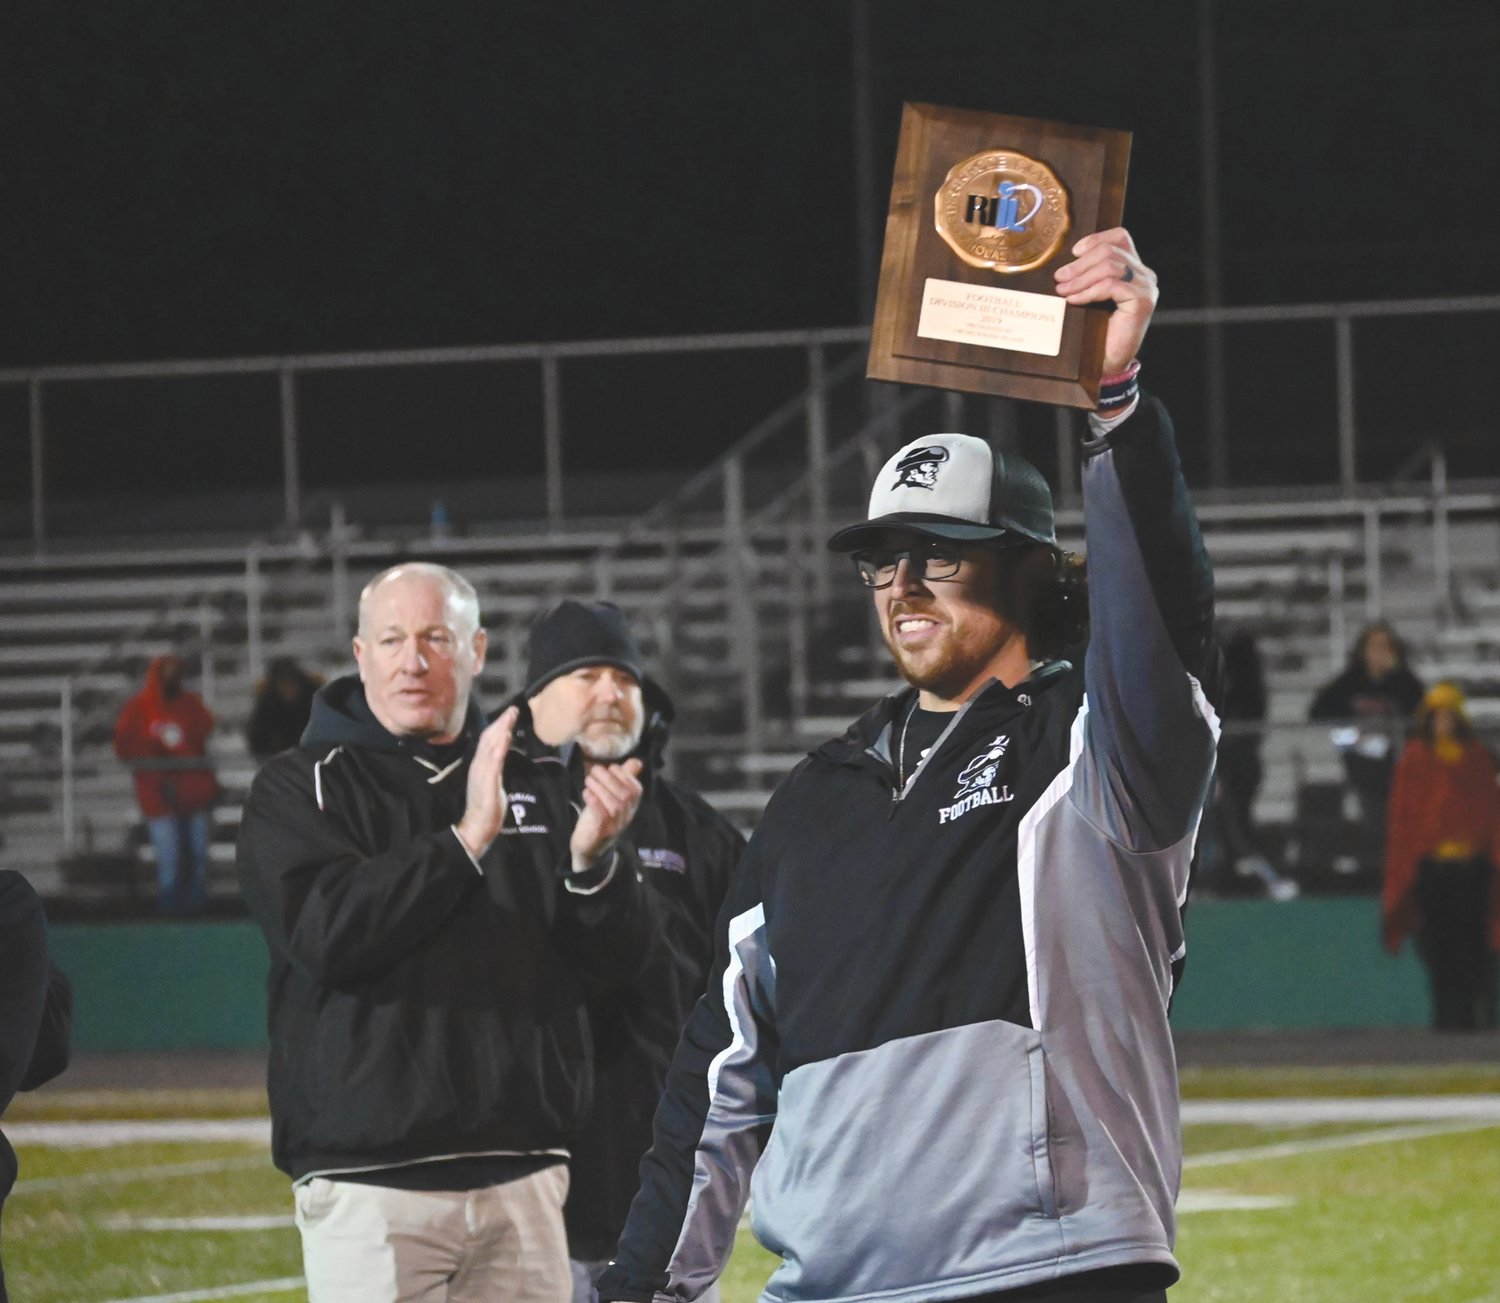 FULL CIRCLE: In the wake of Pilgrim High School Principal Gerald Habershaw’s death Pilgrim High School Head Football Coach Blake Simpson reflected on how 17 years after they first met at Aldrich Junior High Habershaw was able to be beside him as he lifted the High School Division III State Championship Trophy in 2019.